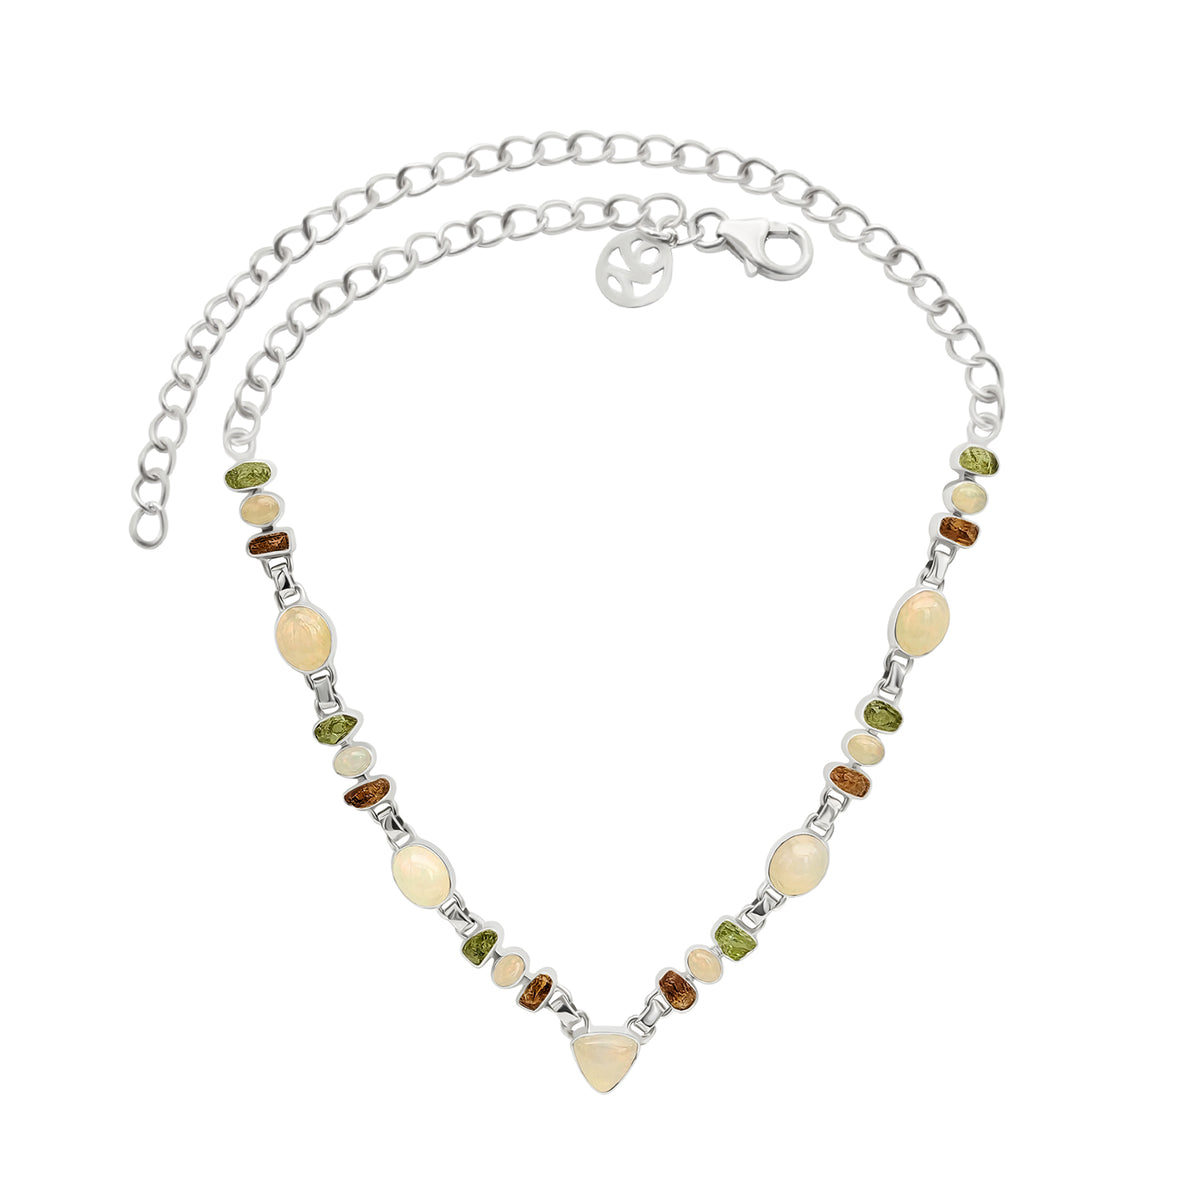 Designer Ethiopian Opal Necklace Studded With Peridot, Citrine Pack of 1  (D37-2)